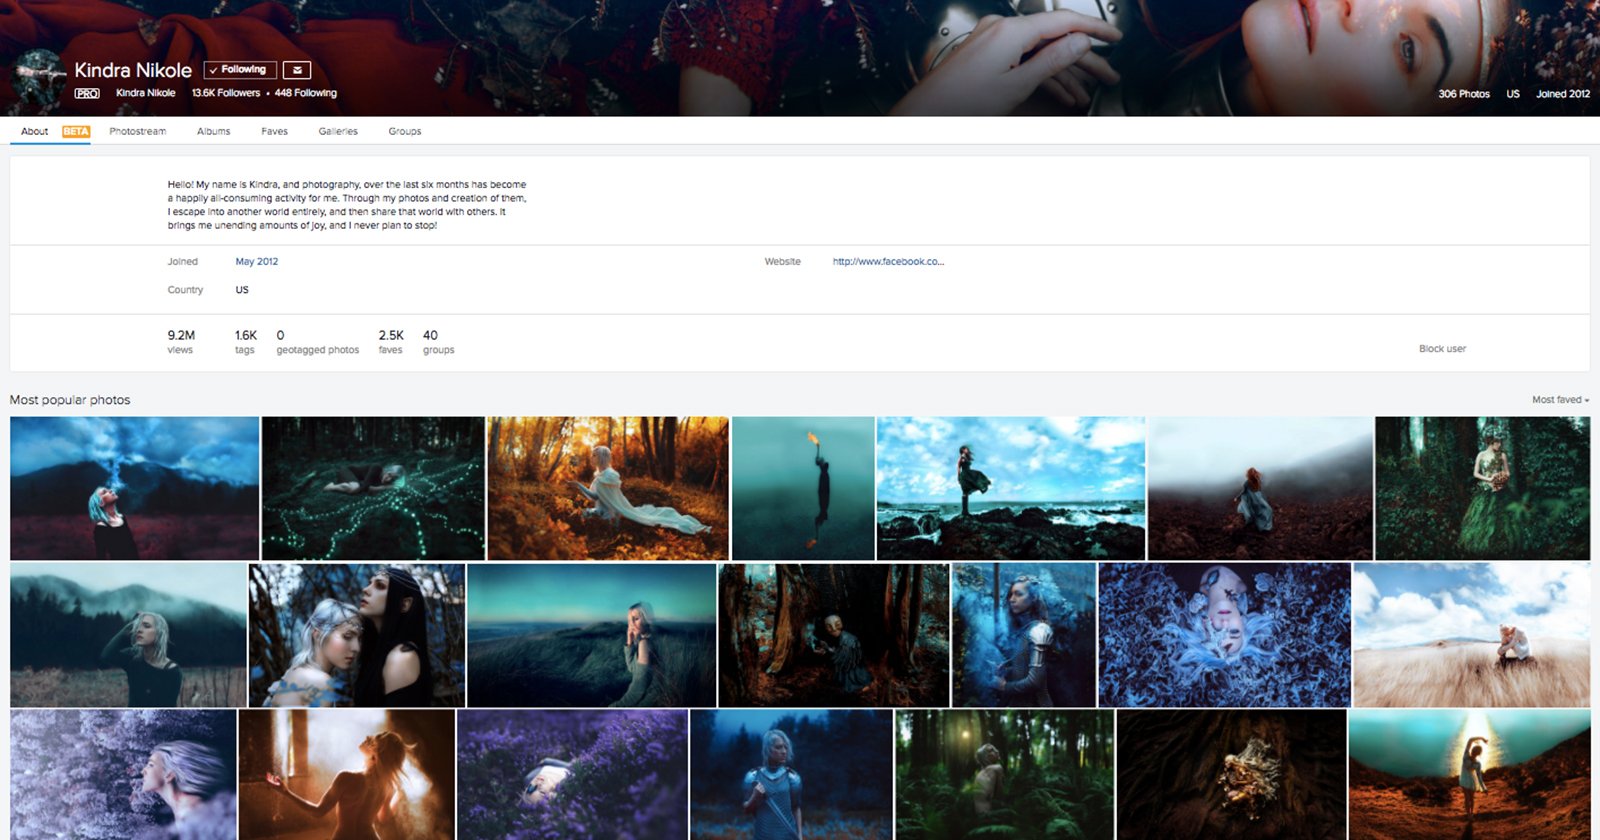  flickr page profile about 